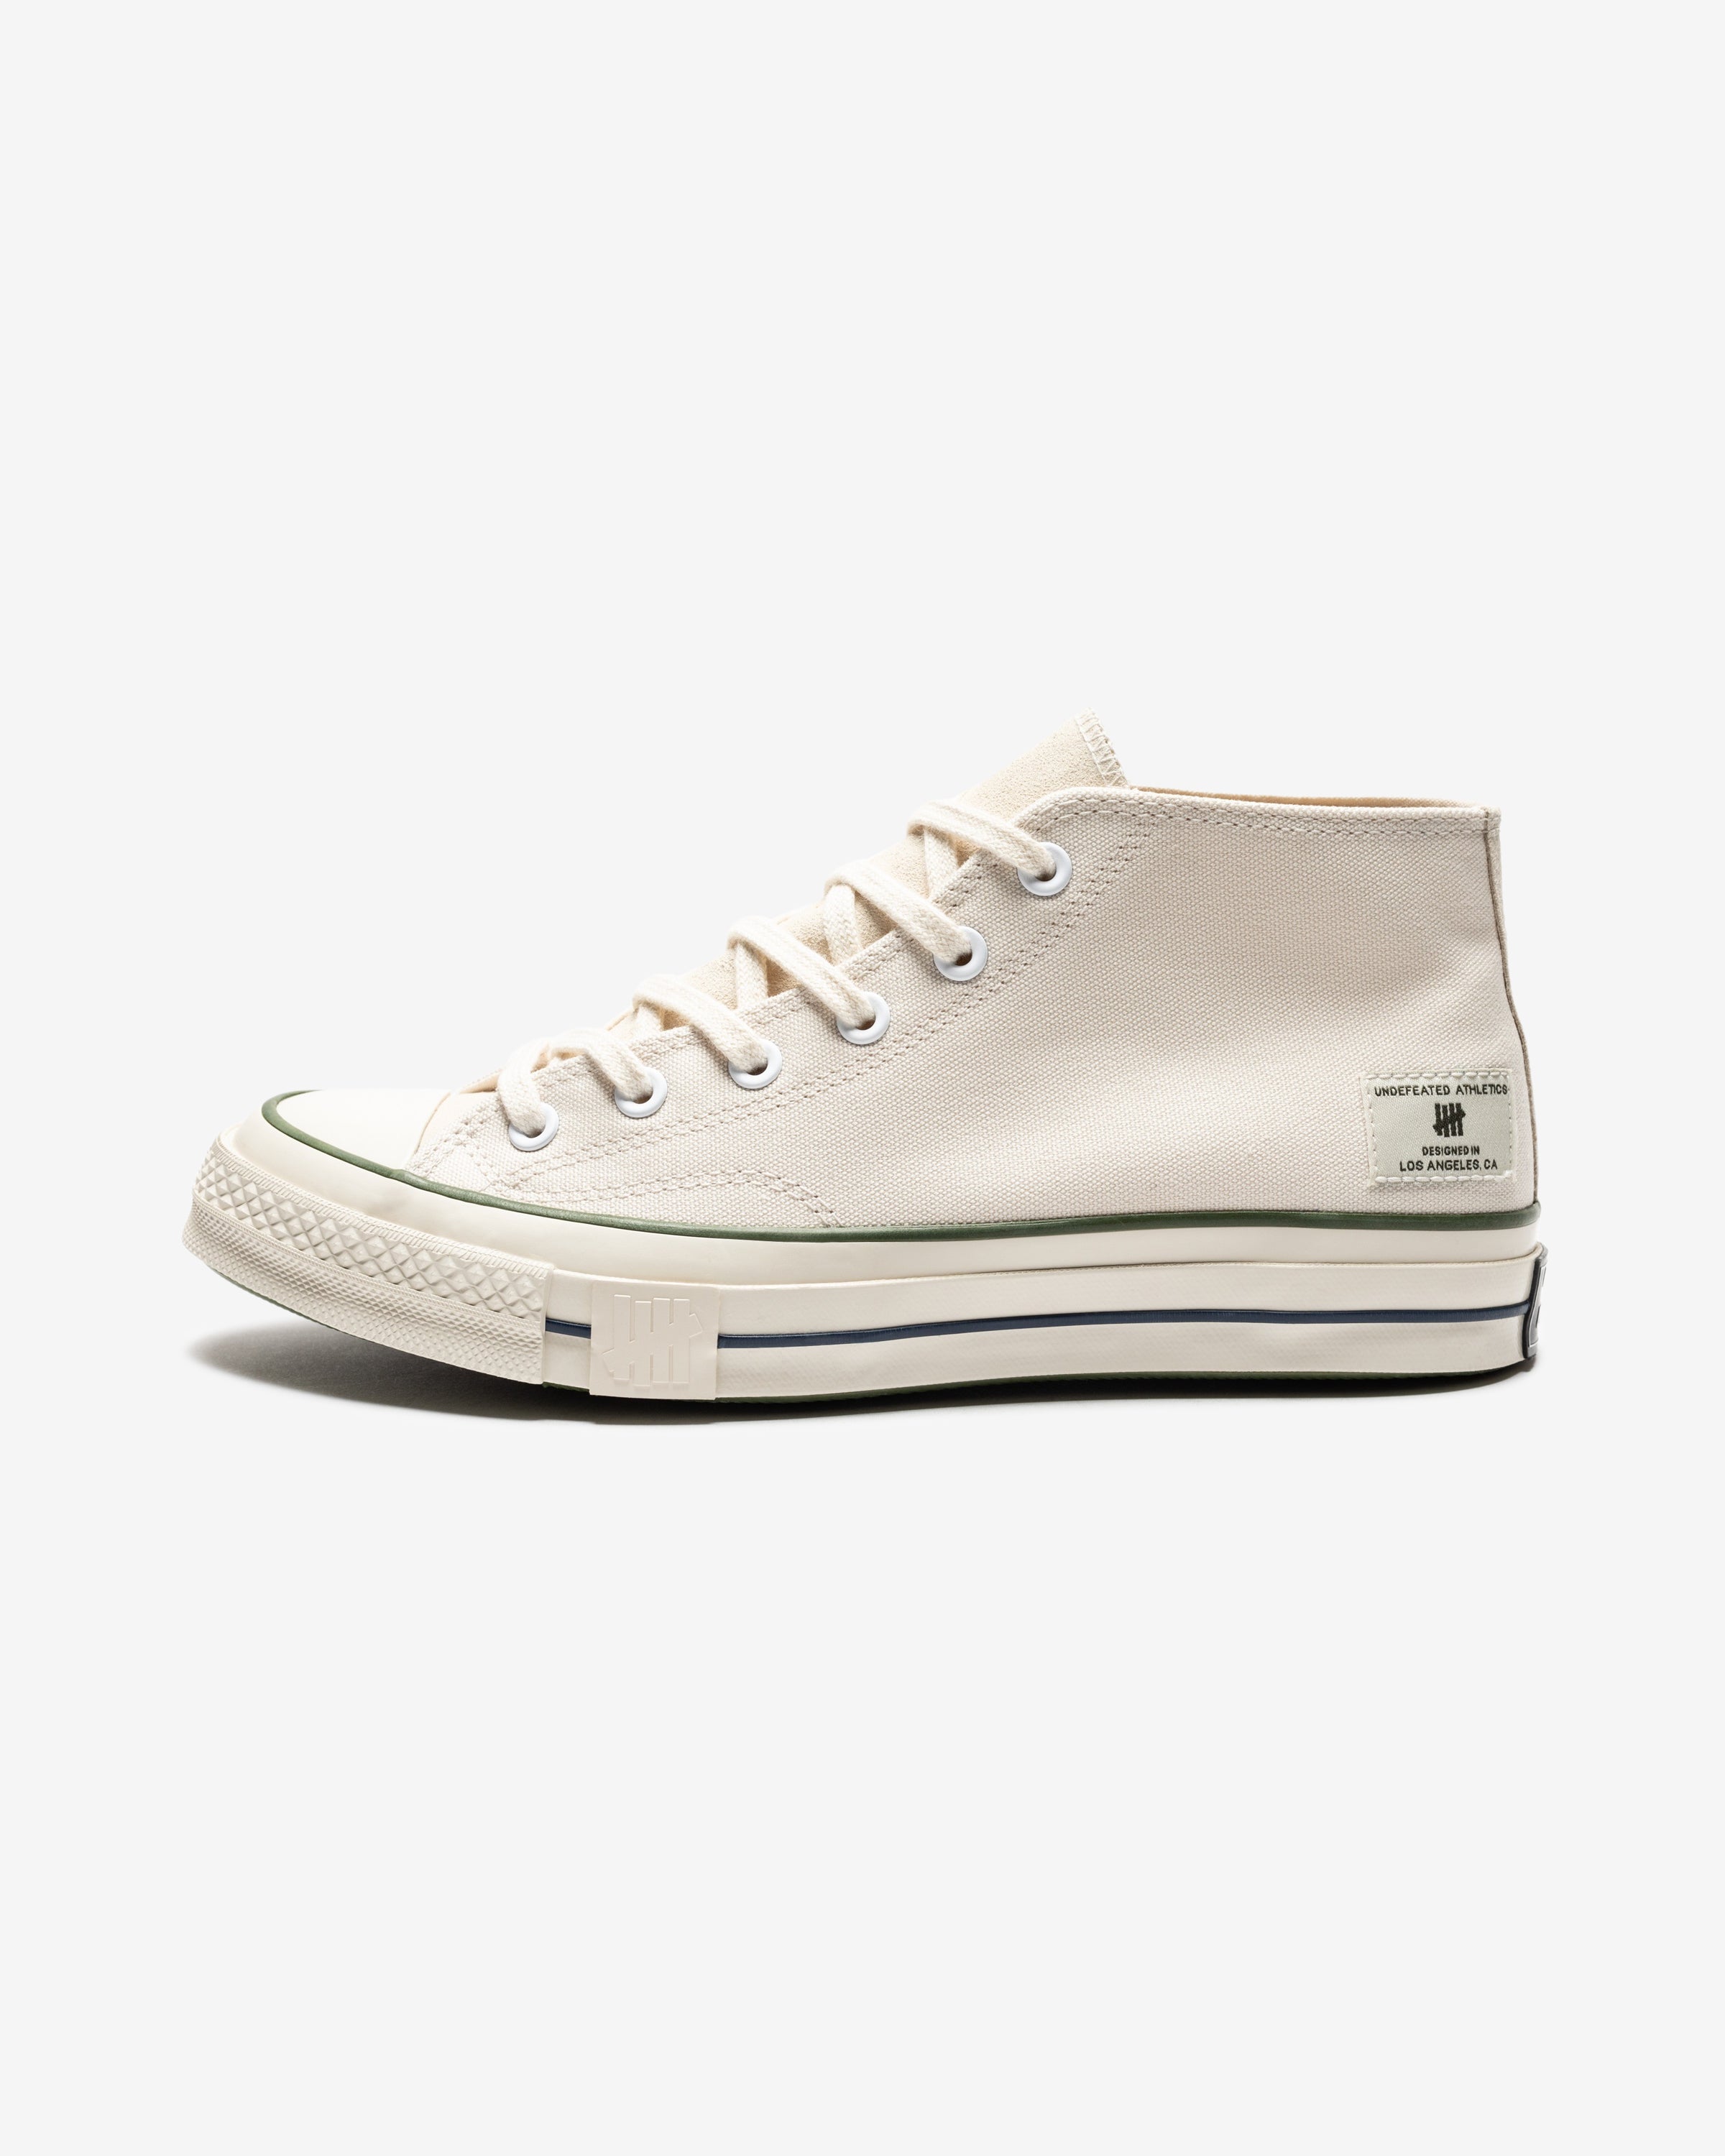 UNDEFEATED X CONVERSE CHUCK 70 MID- PARCHMENT/ CHIVE